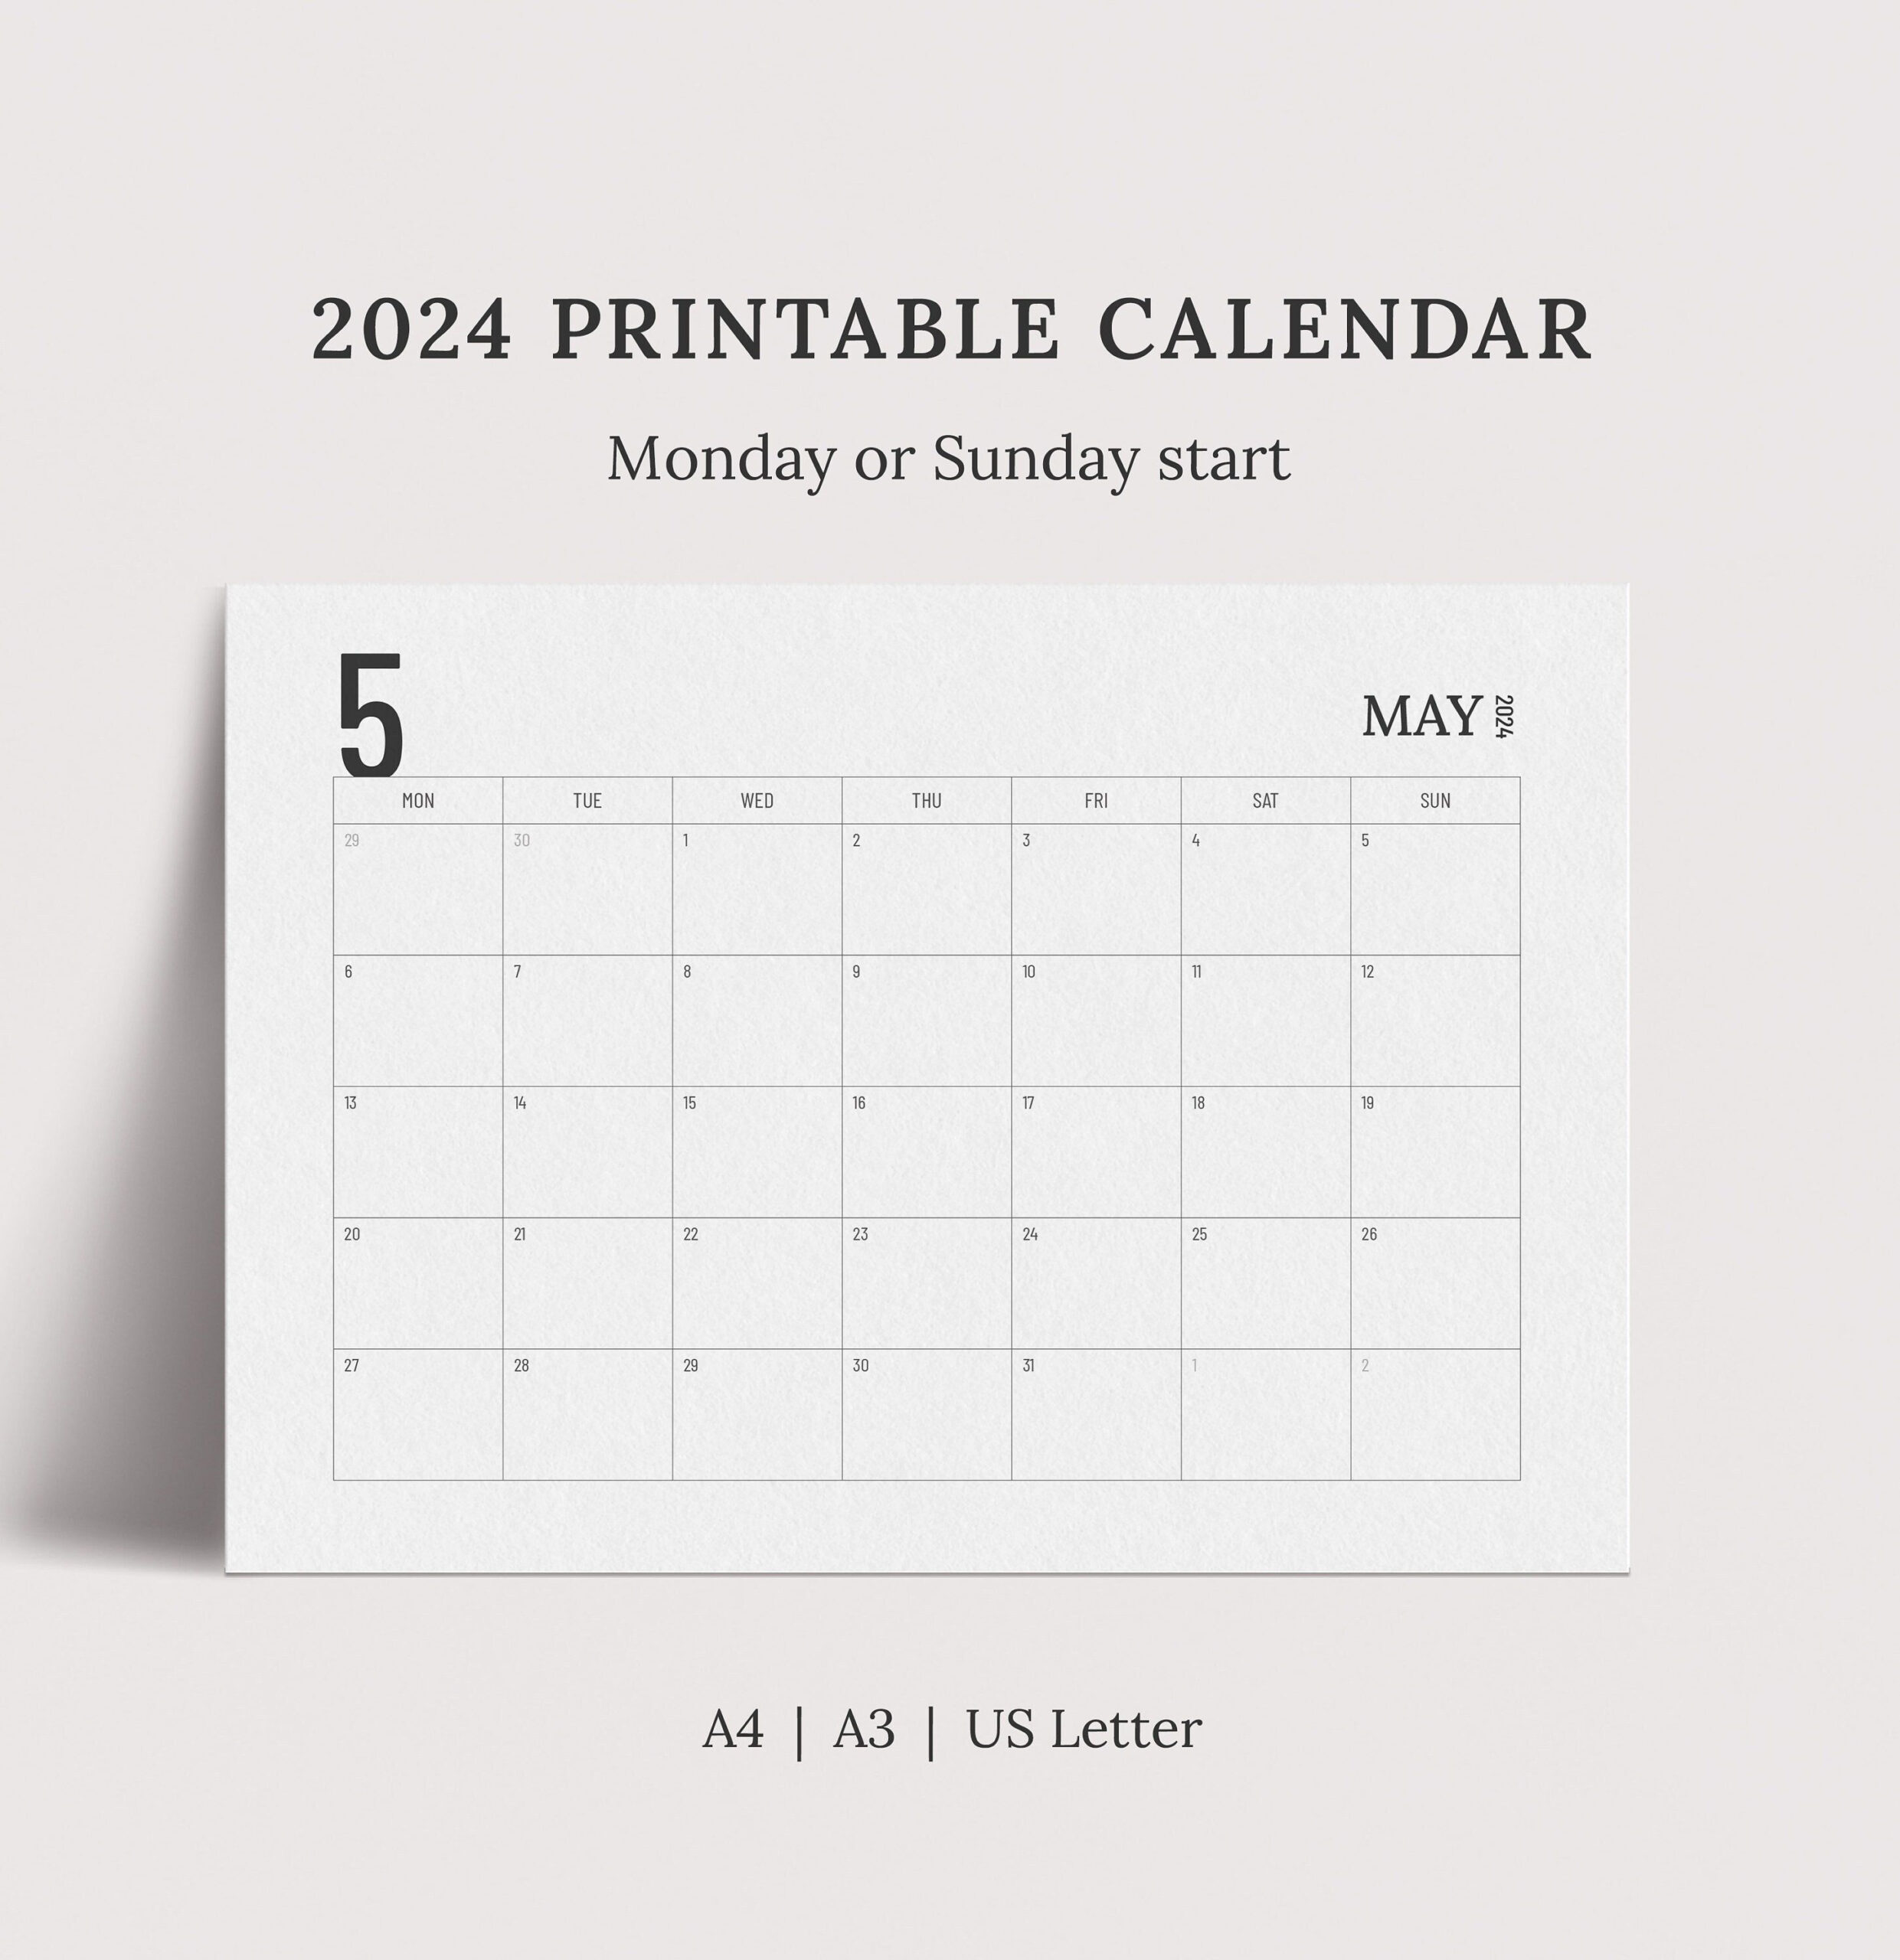 2024 Printable Calendar Minimalist Sizes: A4 Letter A3 - Etsy intended for Free Printable Calendar 2024 5.5 X 8.5